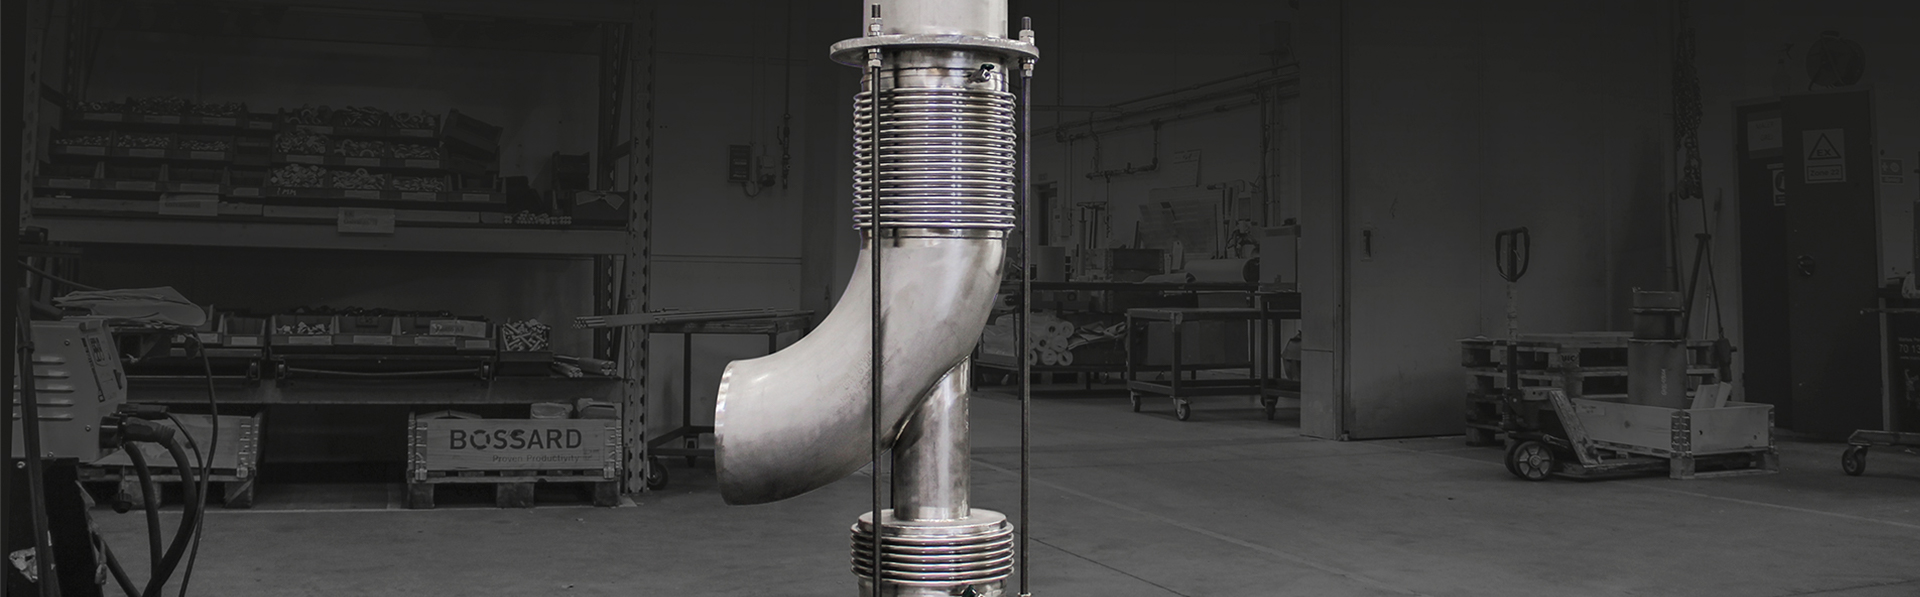 Elbow Expansion Joint needed to be equipped with a leak-detection system